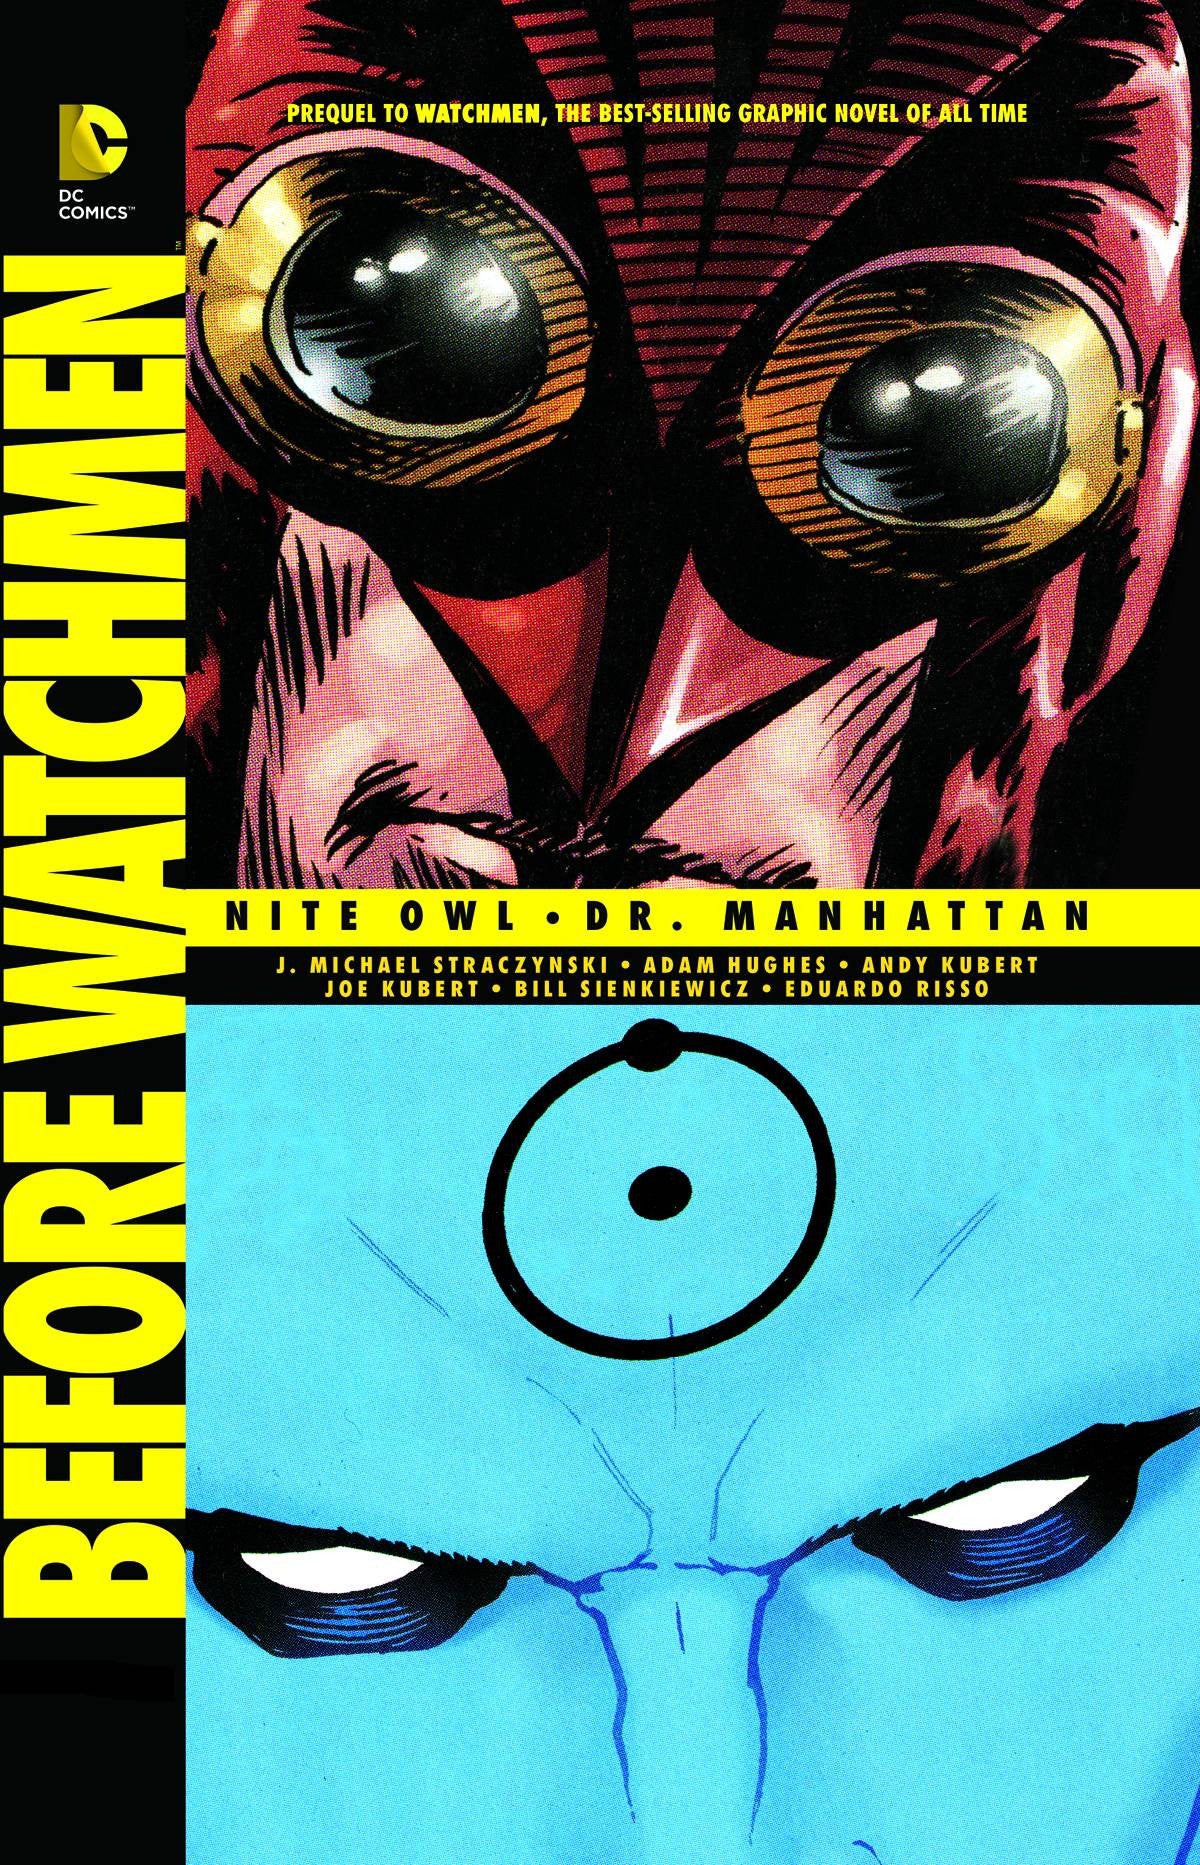 BEFORE WATCHMEN NITE OWL DR MANHATTAN TP COVER